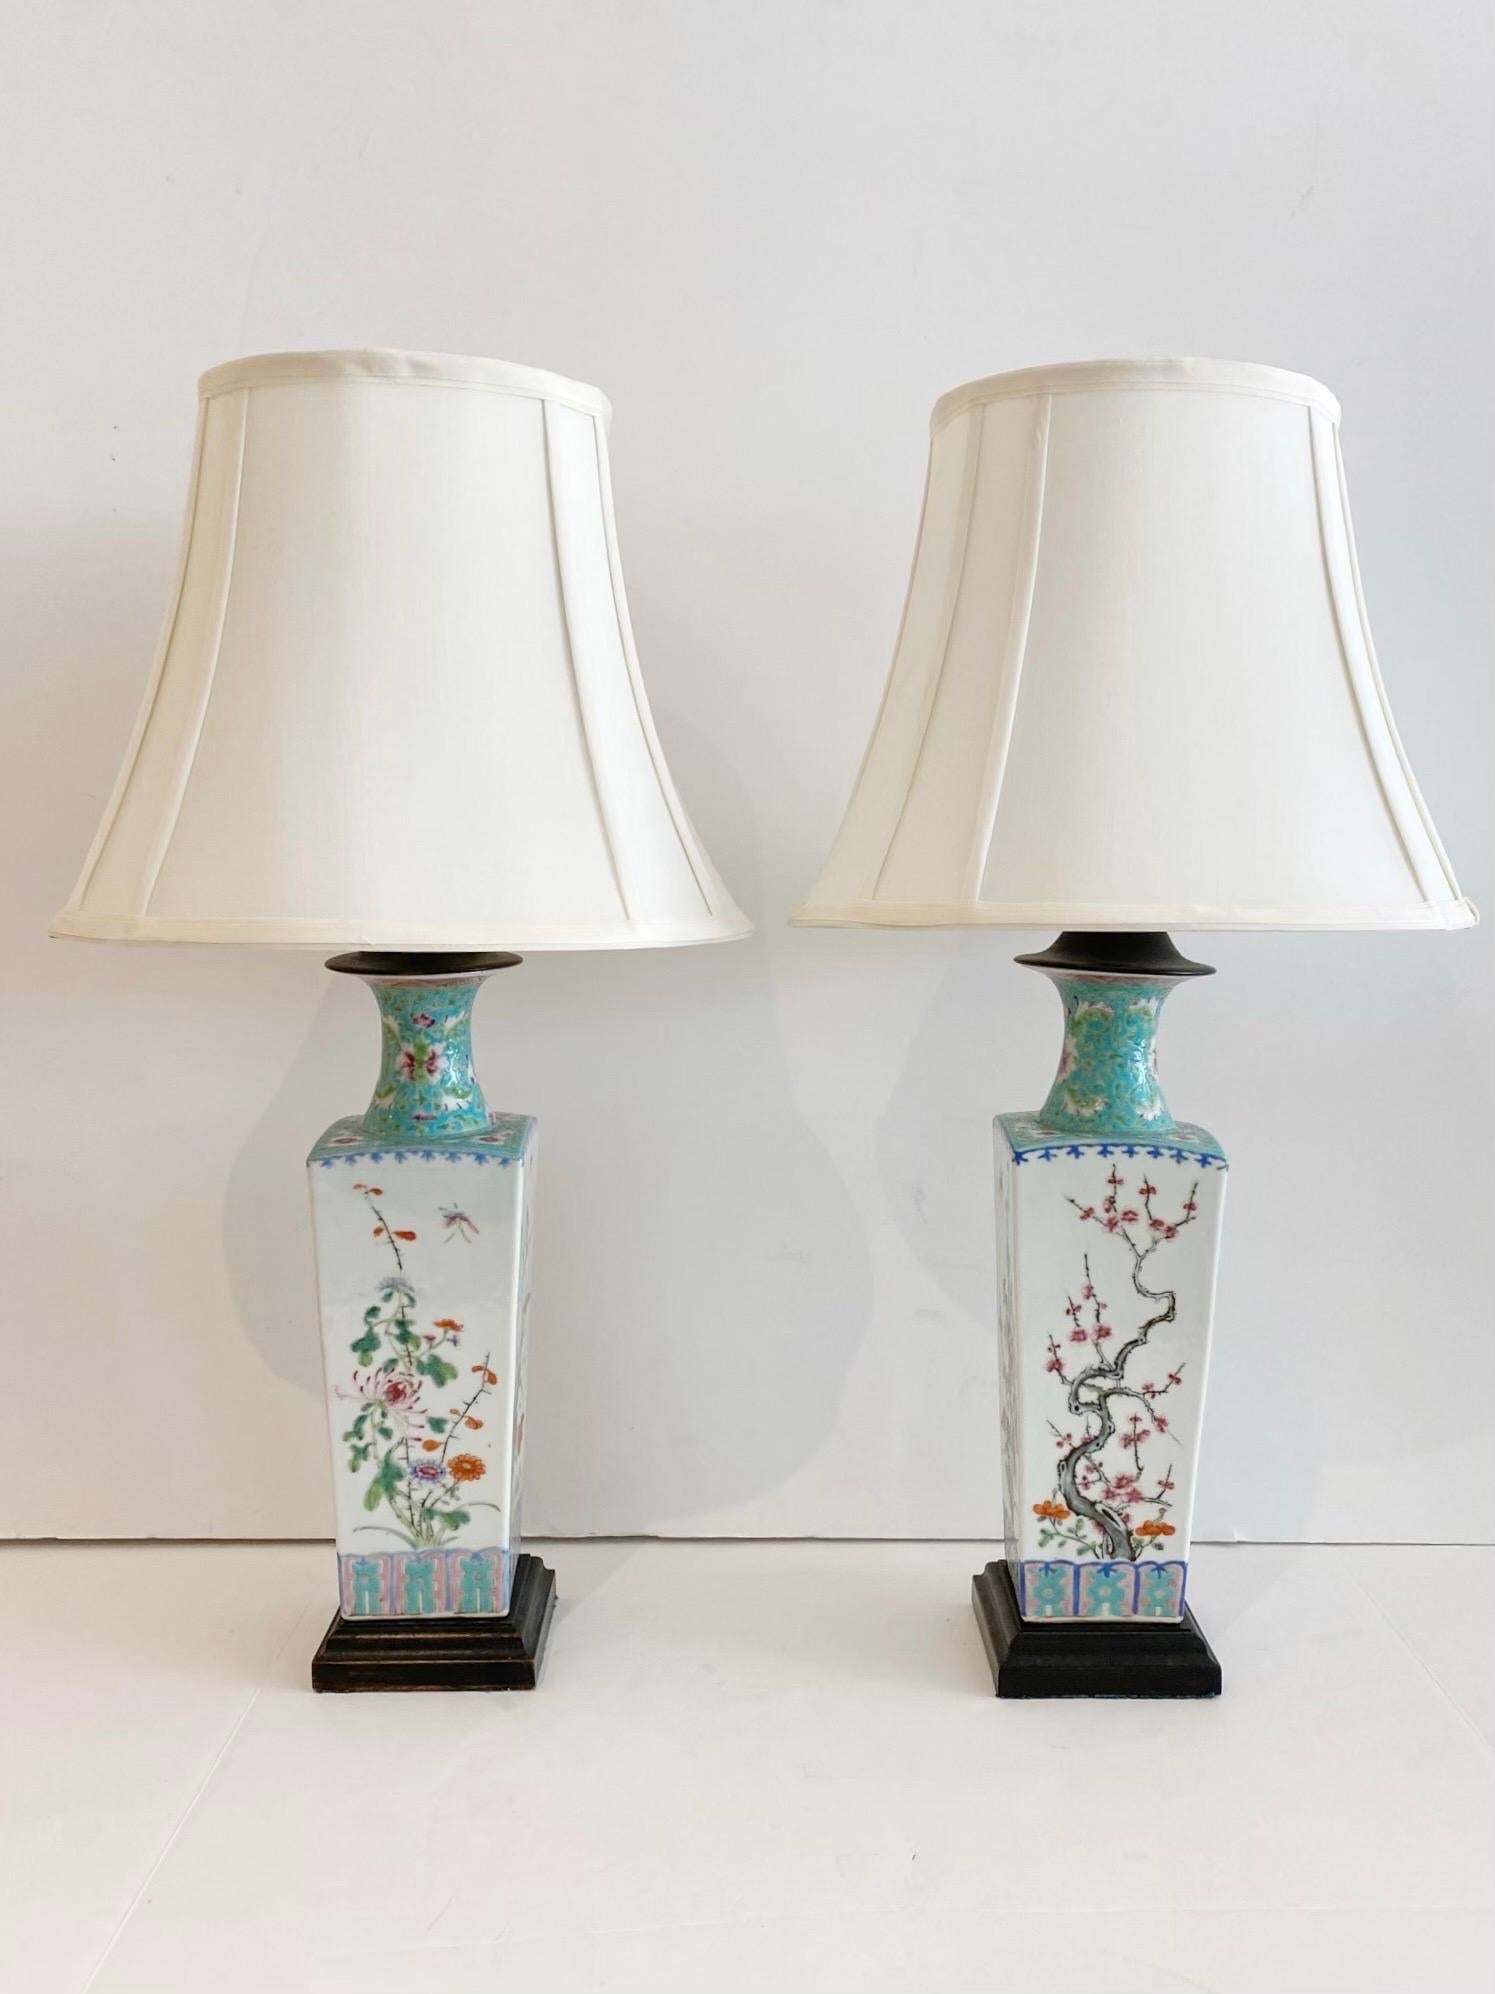 Pair Chinese Export Turquoise/ White Famille-Verte Floral Vases now as Lamps 

Each one of square form, finely decorated with intricate turquoise enameled necks, the sides hand painted with florals including lotus, chrysanthemum and prunus